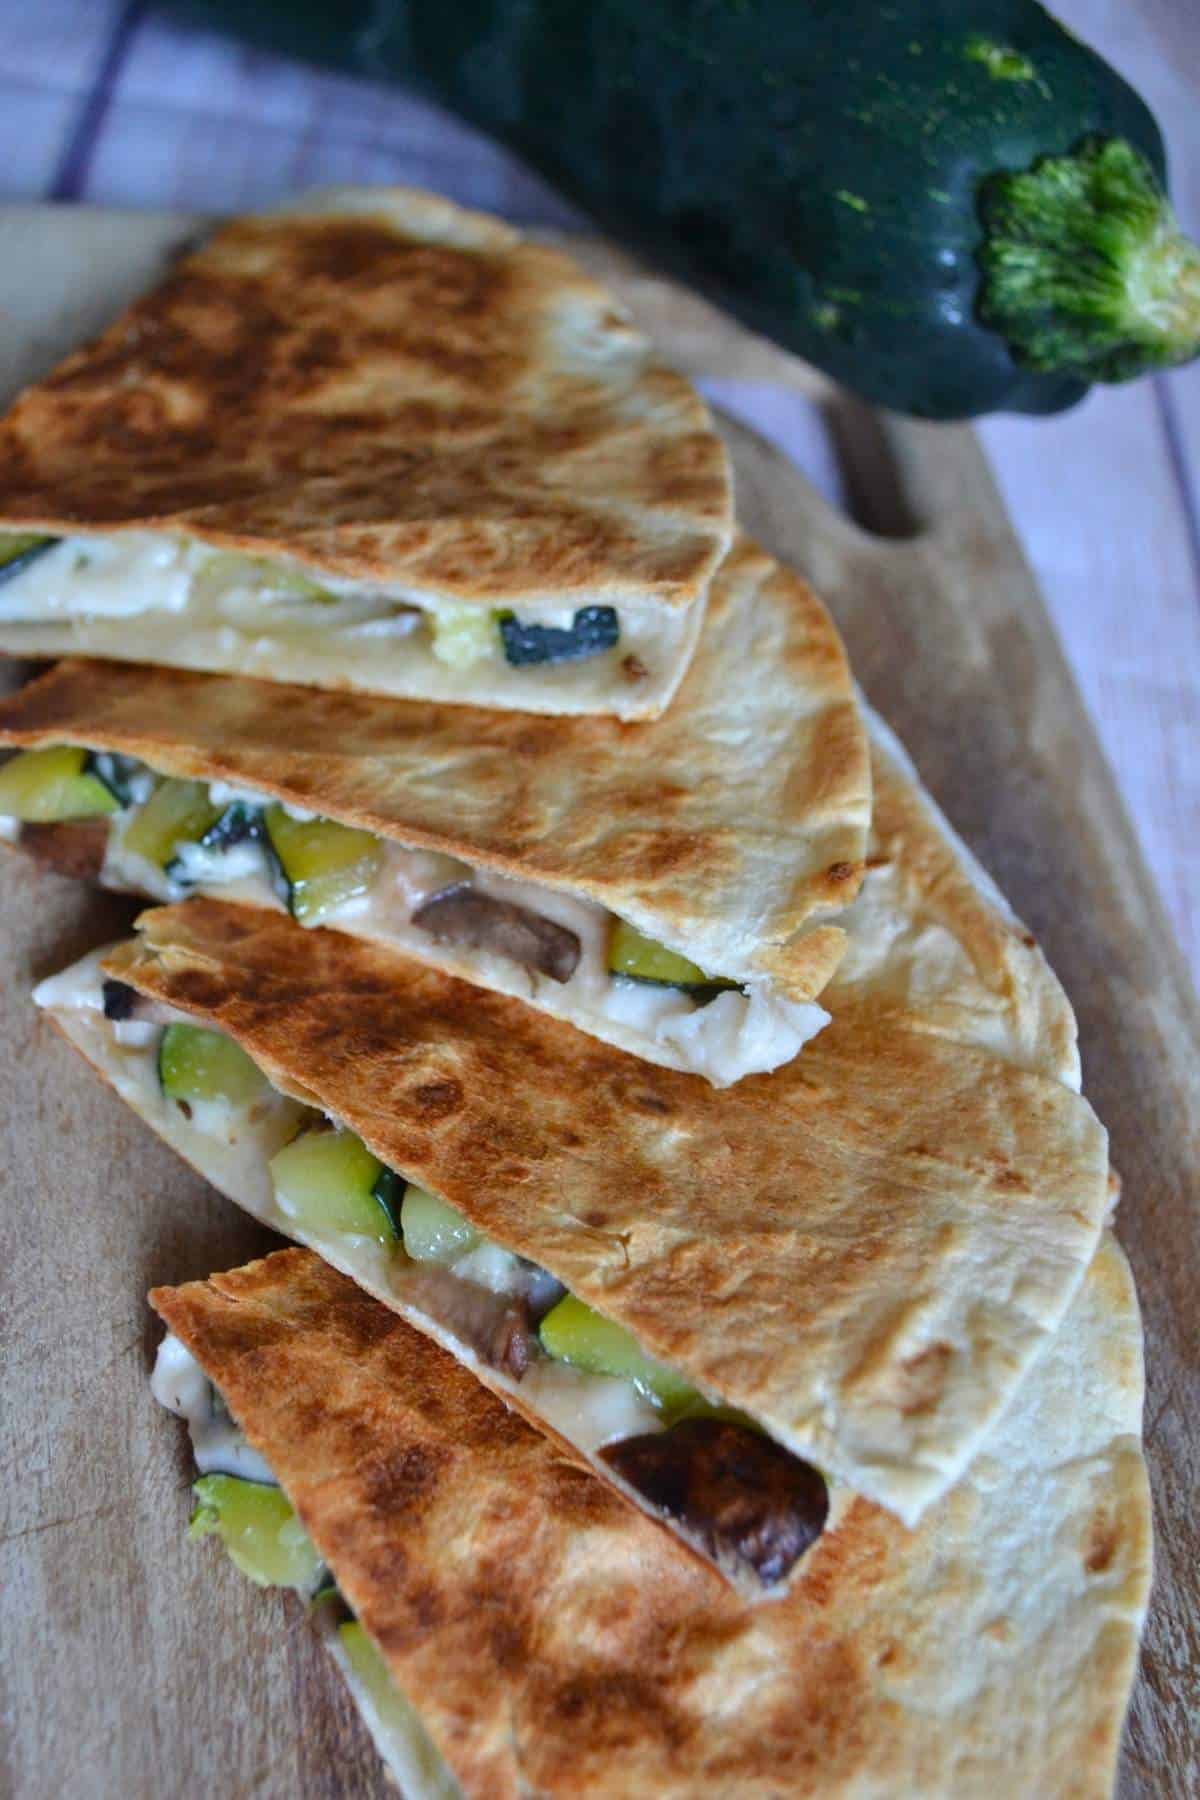 finished quesadillas with a whole zucchini in the background.